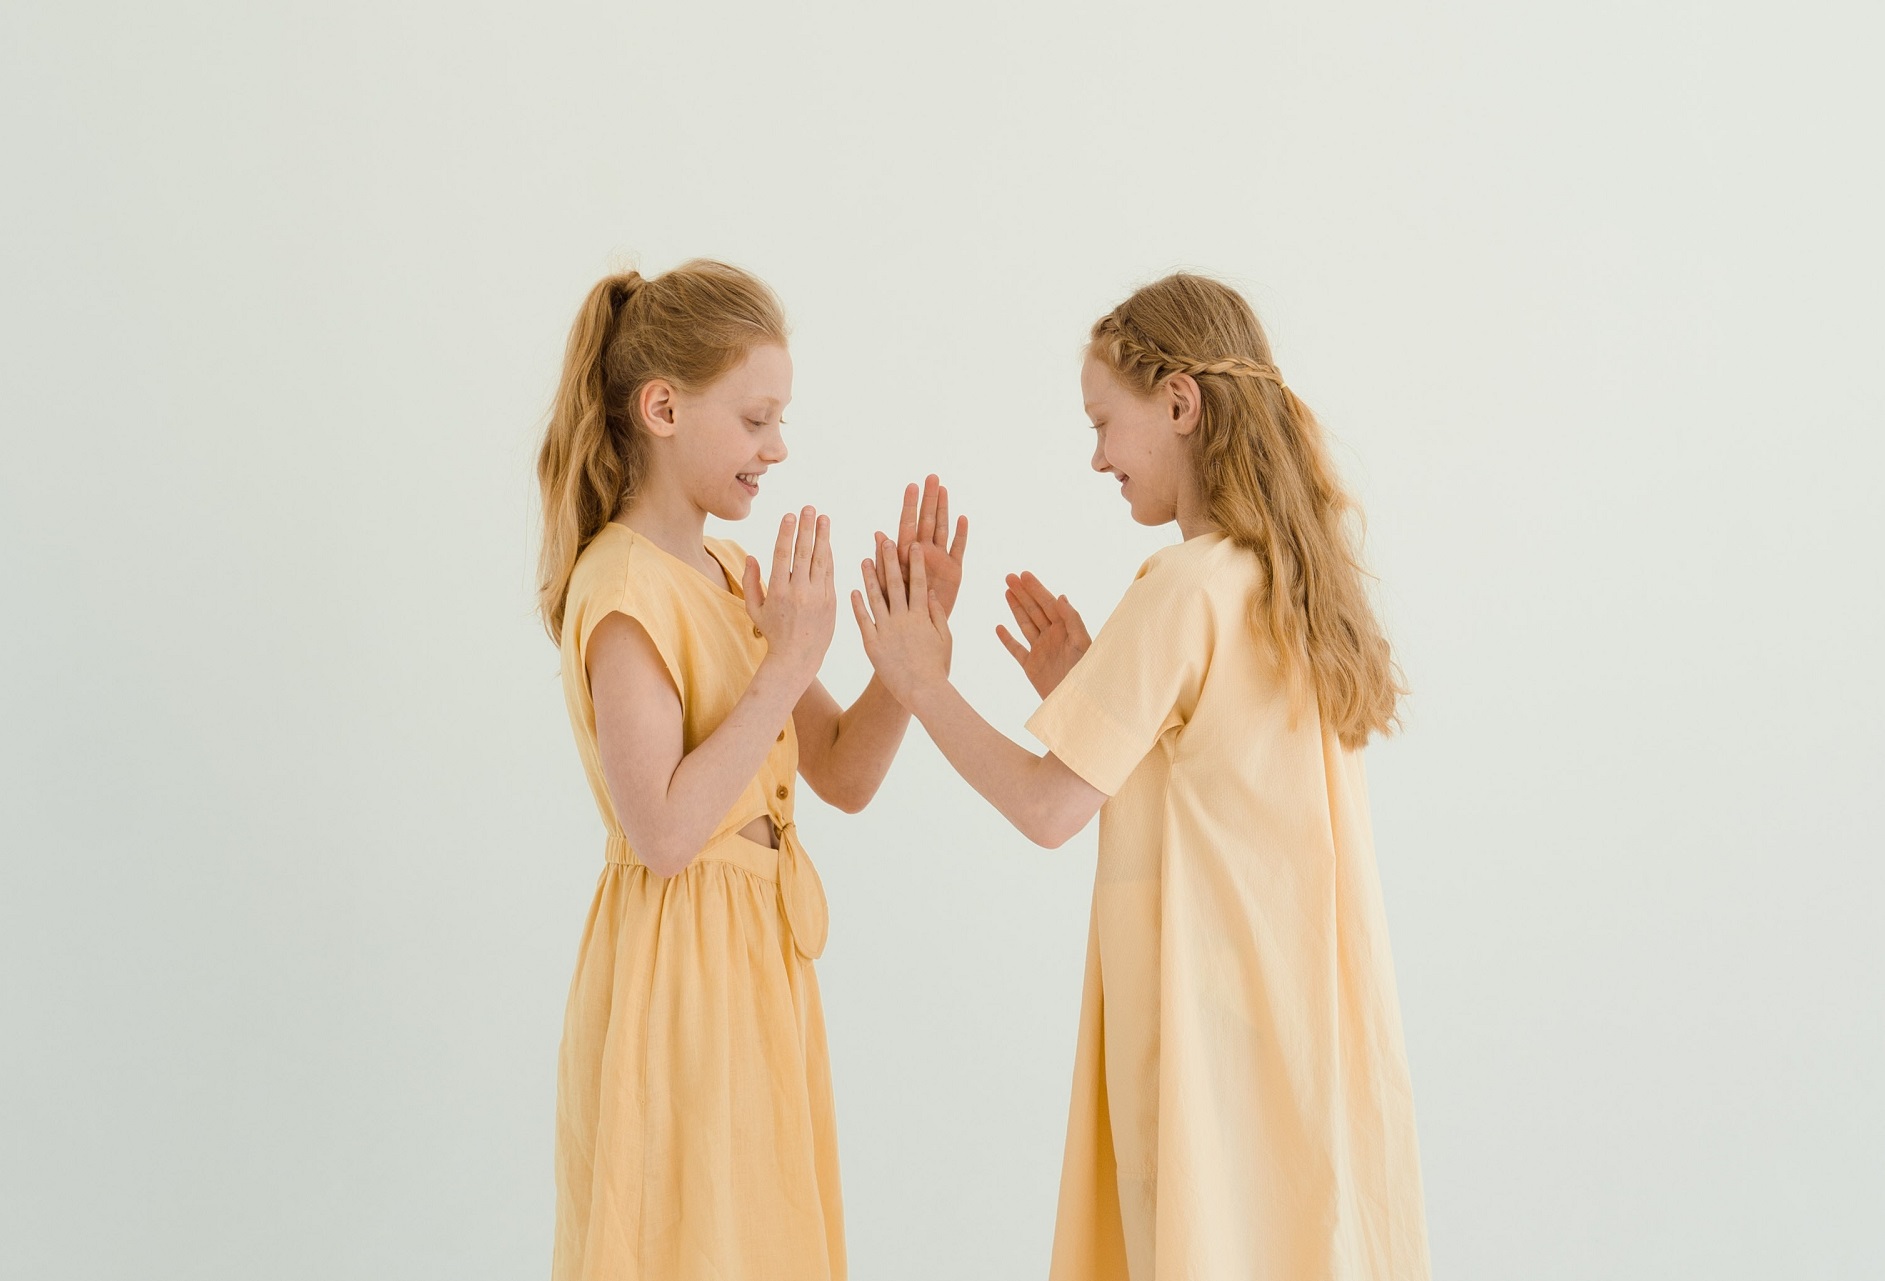 two girls clapping game pexels 9532730